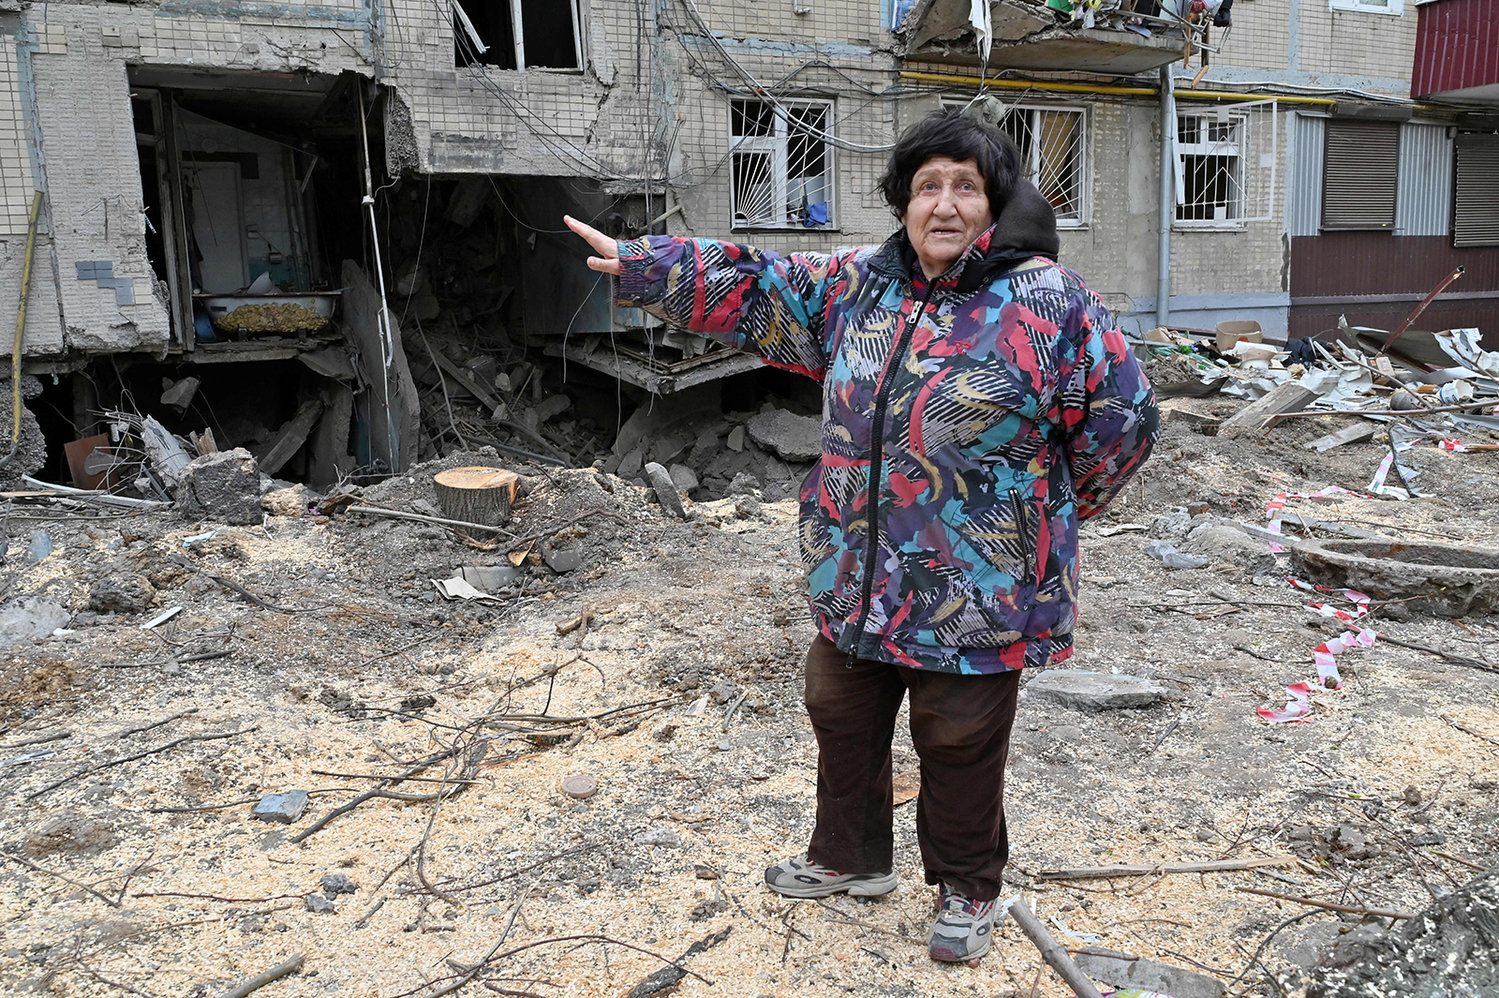 An elderly woman gestures toward a partially destroyed five-story building in the Ukrainian city of Kharkiv on April 10, 2022, amid the Russian invasion of Ukraine. (Sergey Bobok/AFP via Getty Images/TNS)